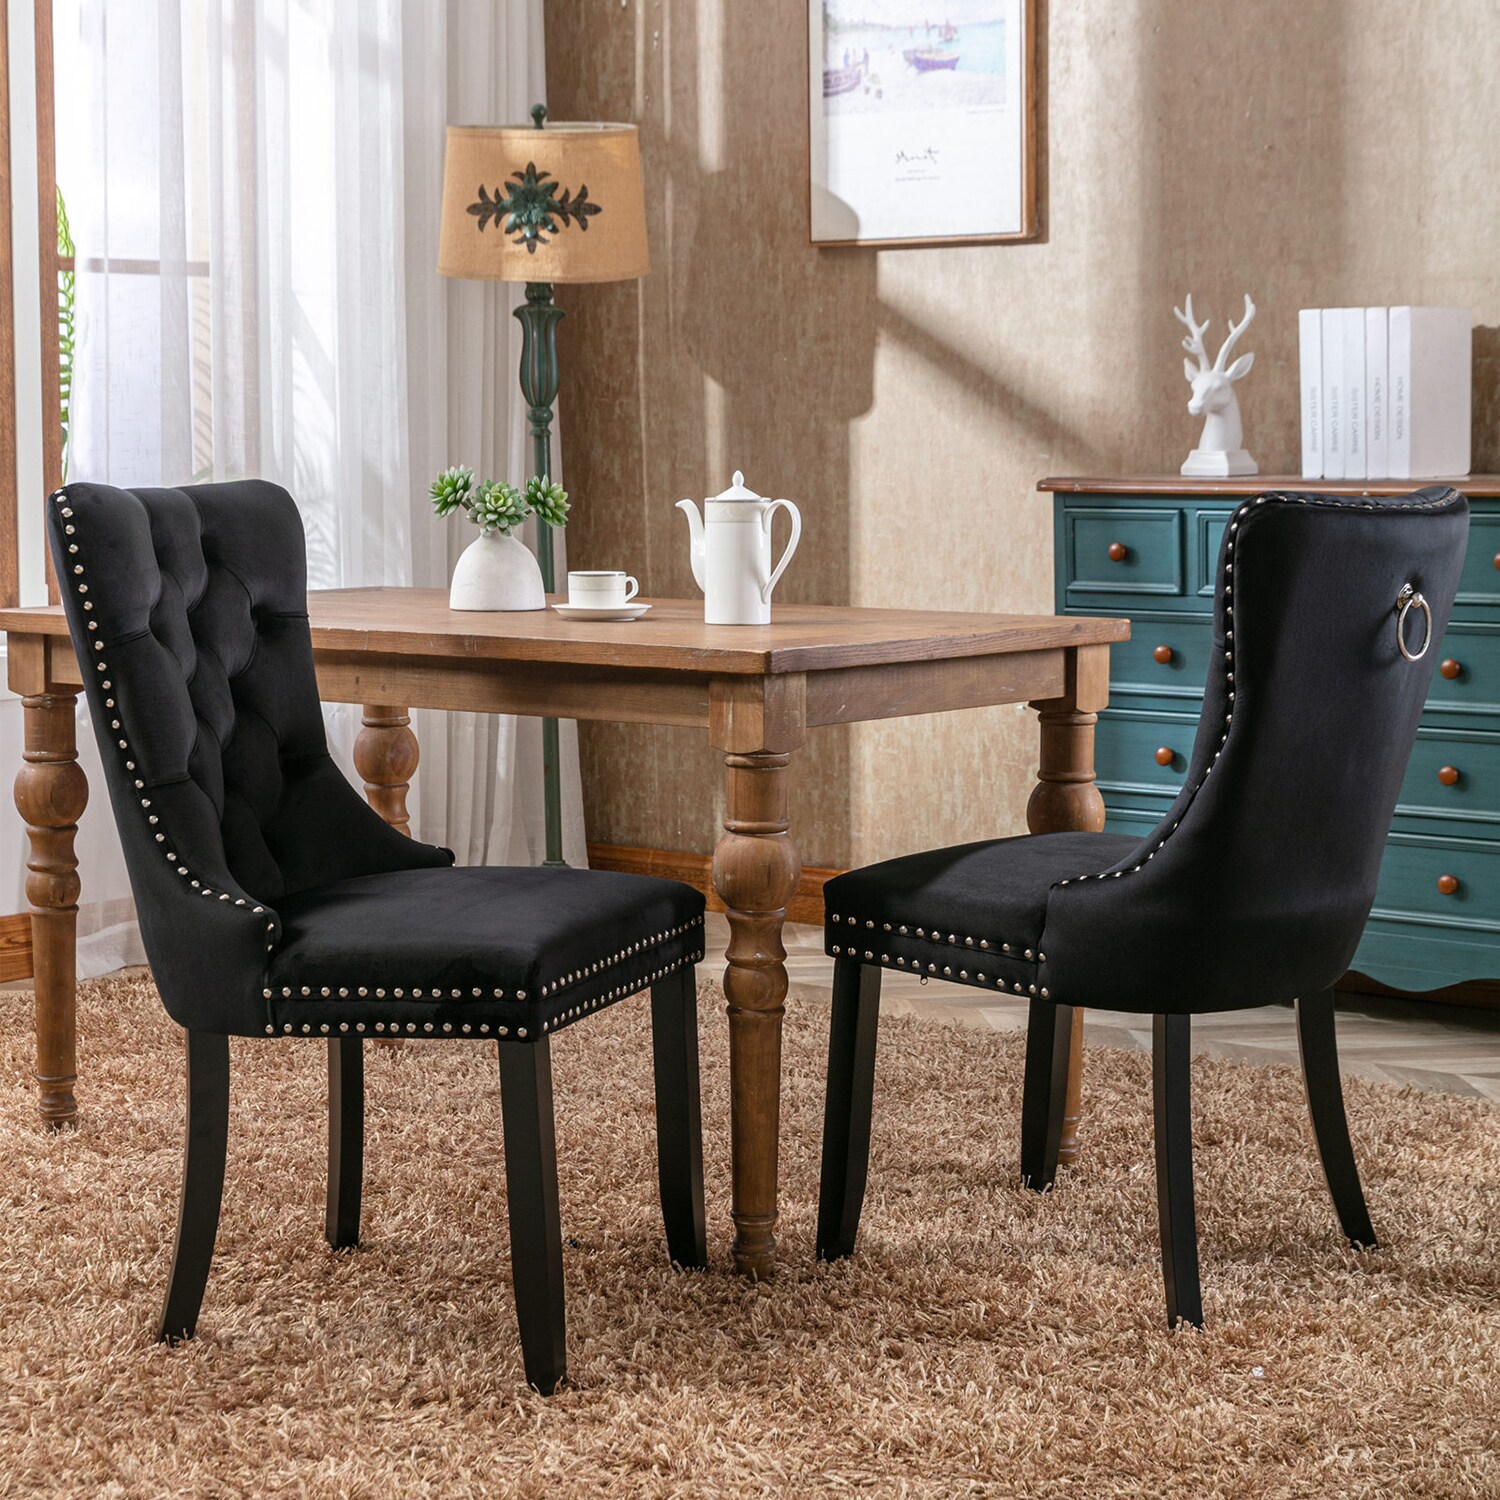 GZMR 2-Pcs Set Velvet Upholstered Chair department the Side in Chair (Wood Upholstered Dining Velvet Dining Frame) Chairs Dining Contemporary/Modern at